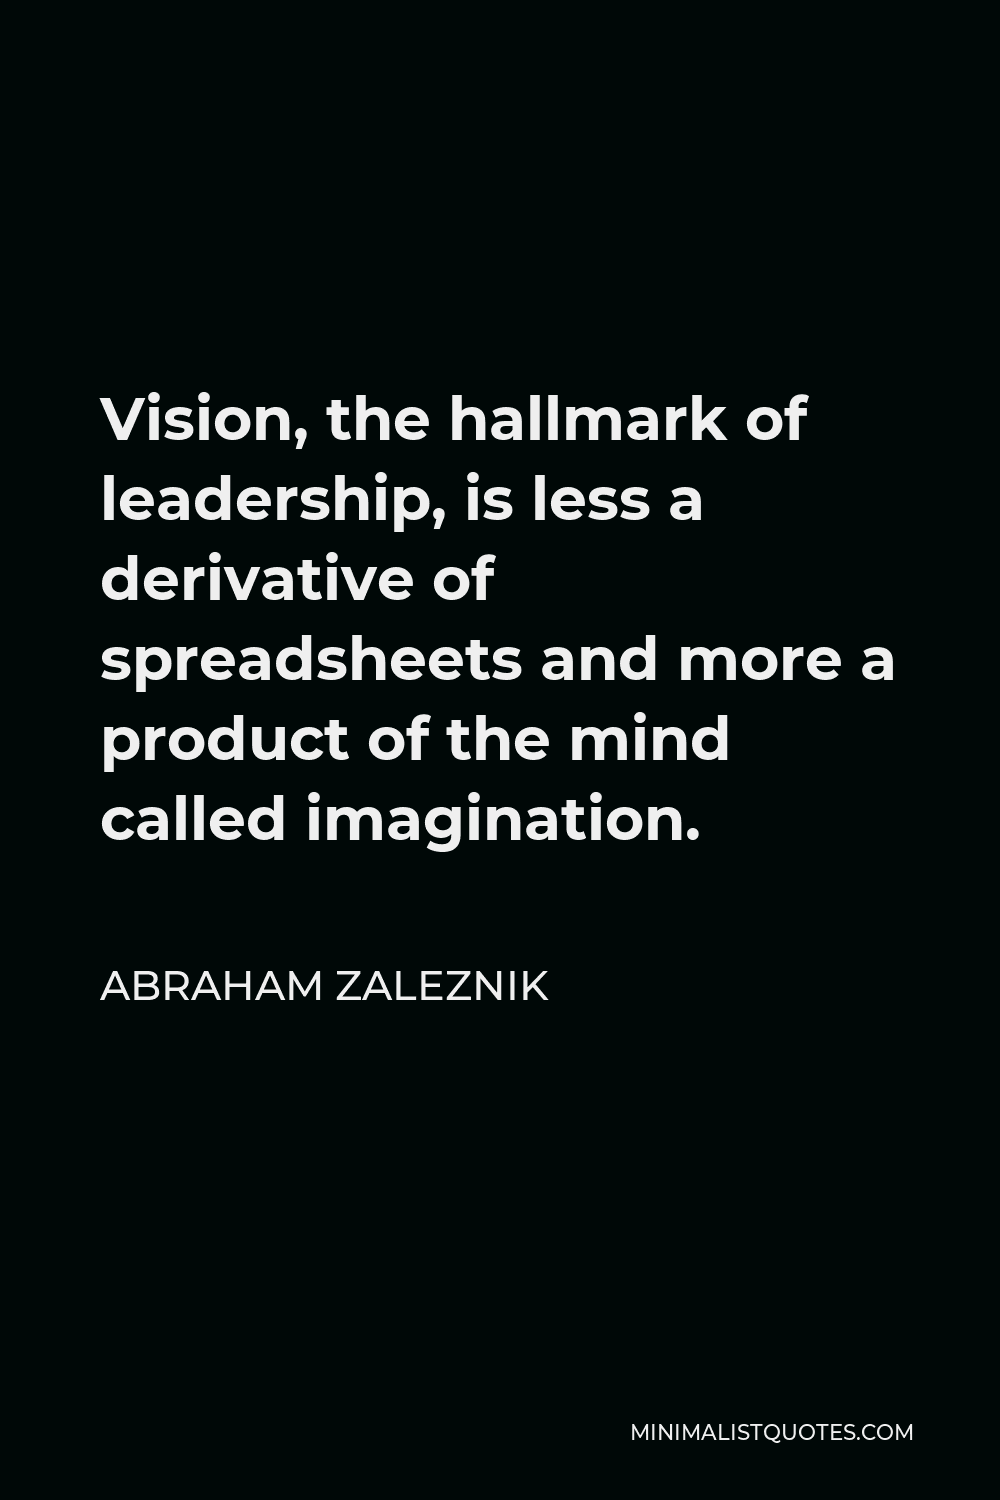 Abraham Zaleznik Quote - Vision, the hallmark of leadership, is less a derivative of spreadsheets and more a product of the mind called imagination.